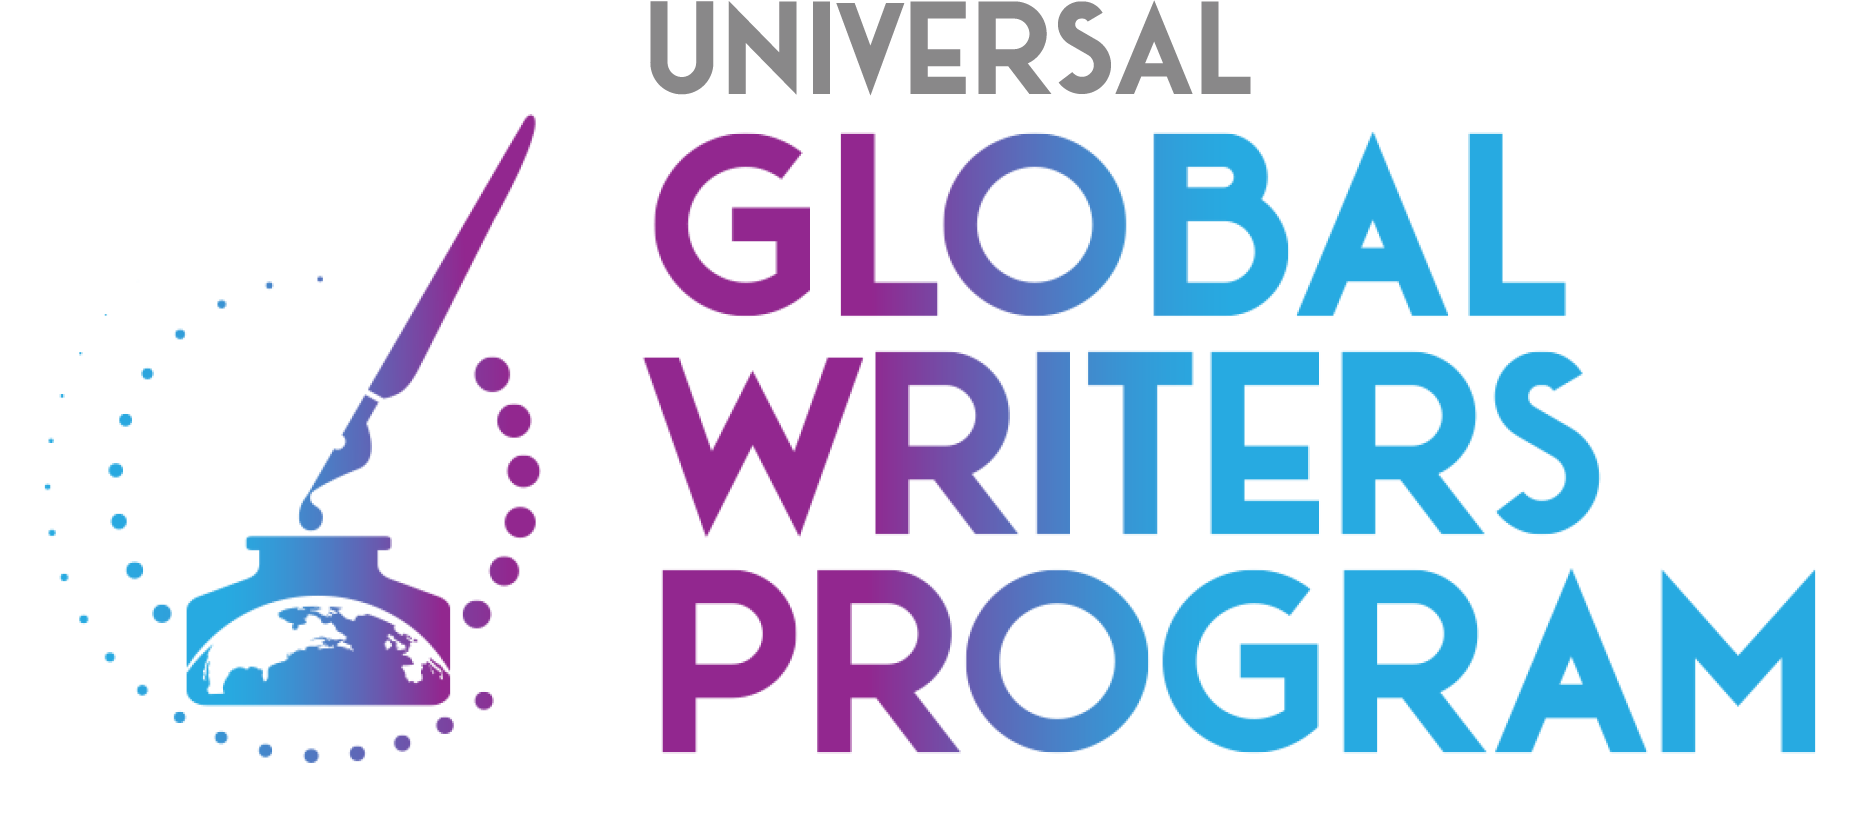 UNIVERSAL STORIES FROM INTERNATIONAL PERSPECTIVES